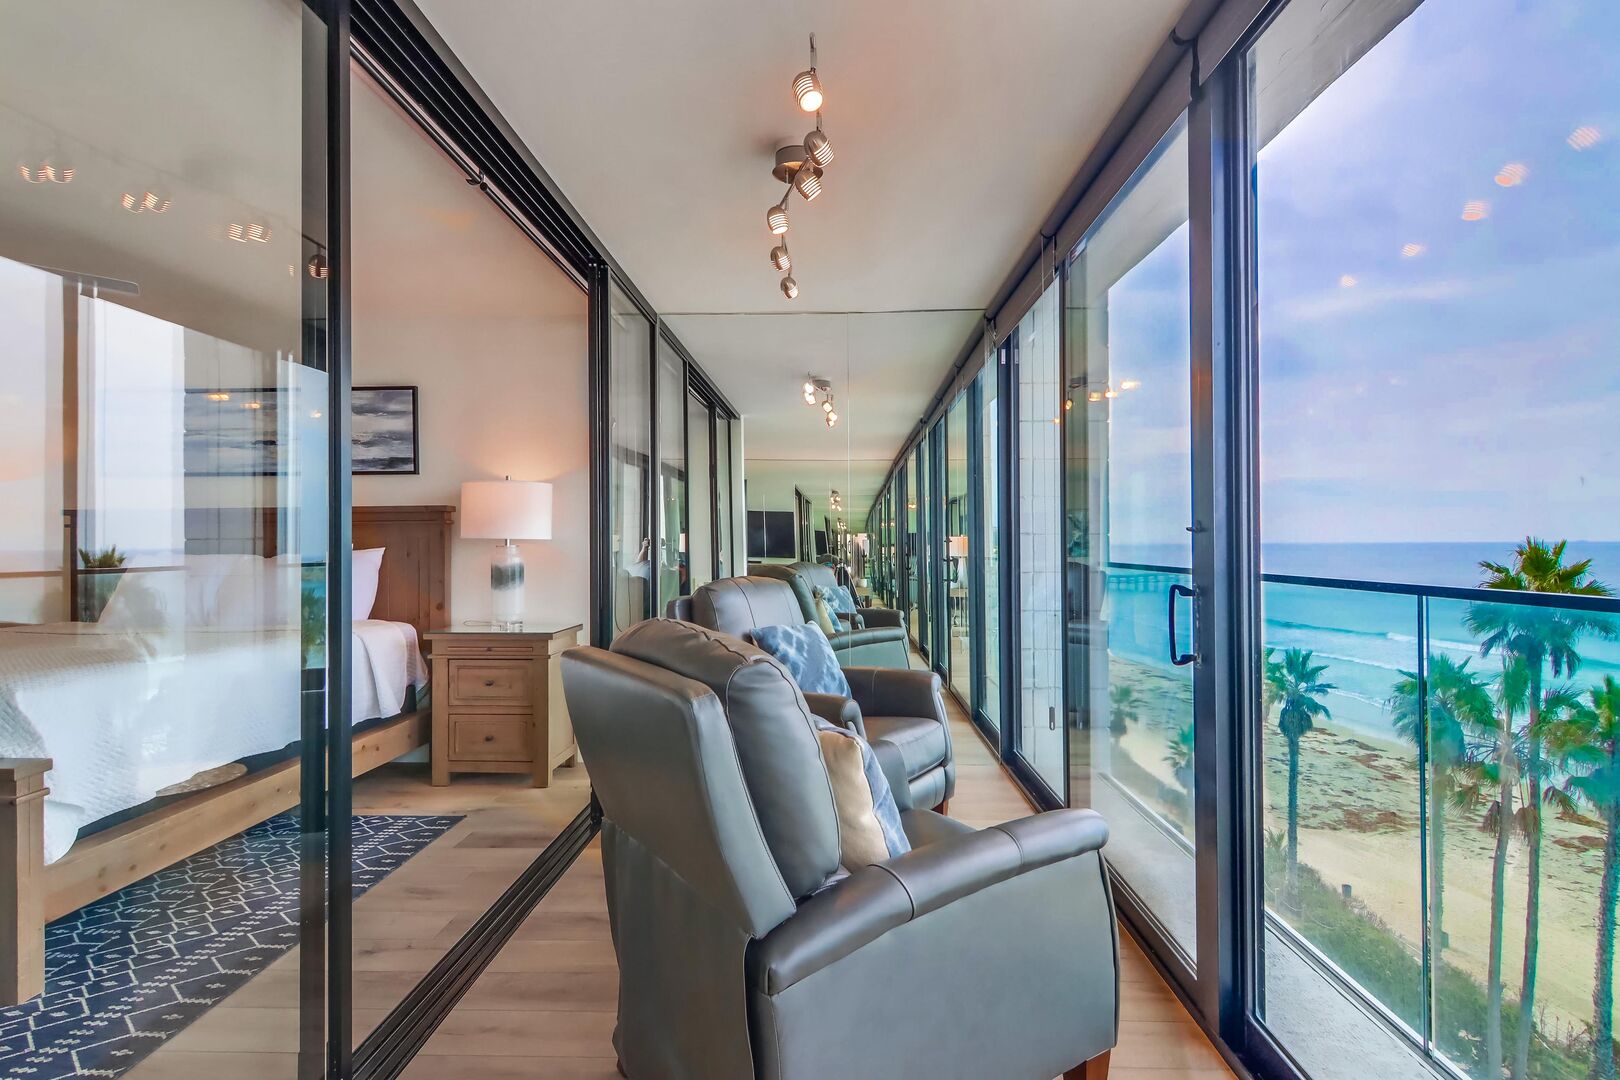 Sitting room with stunning ocean views.